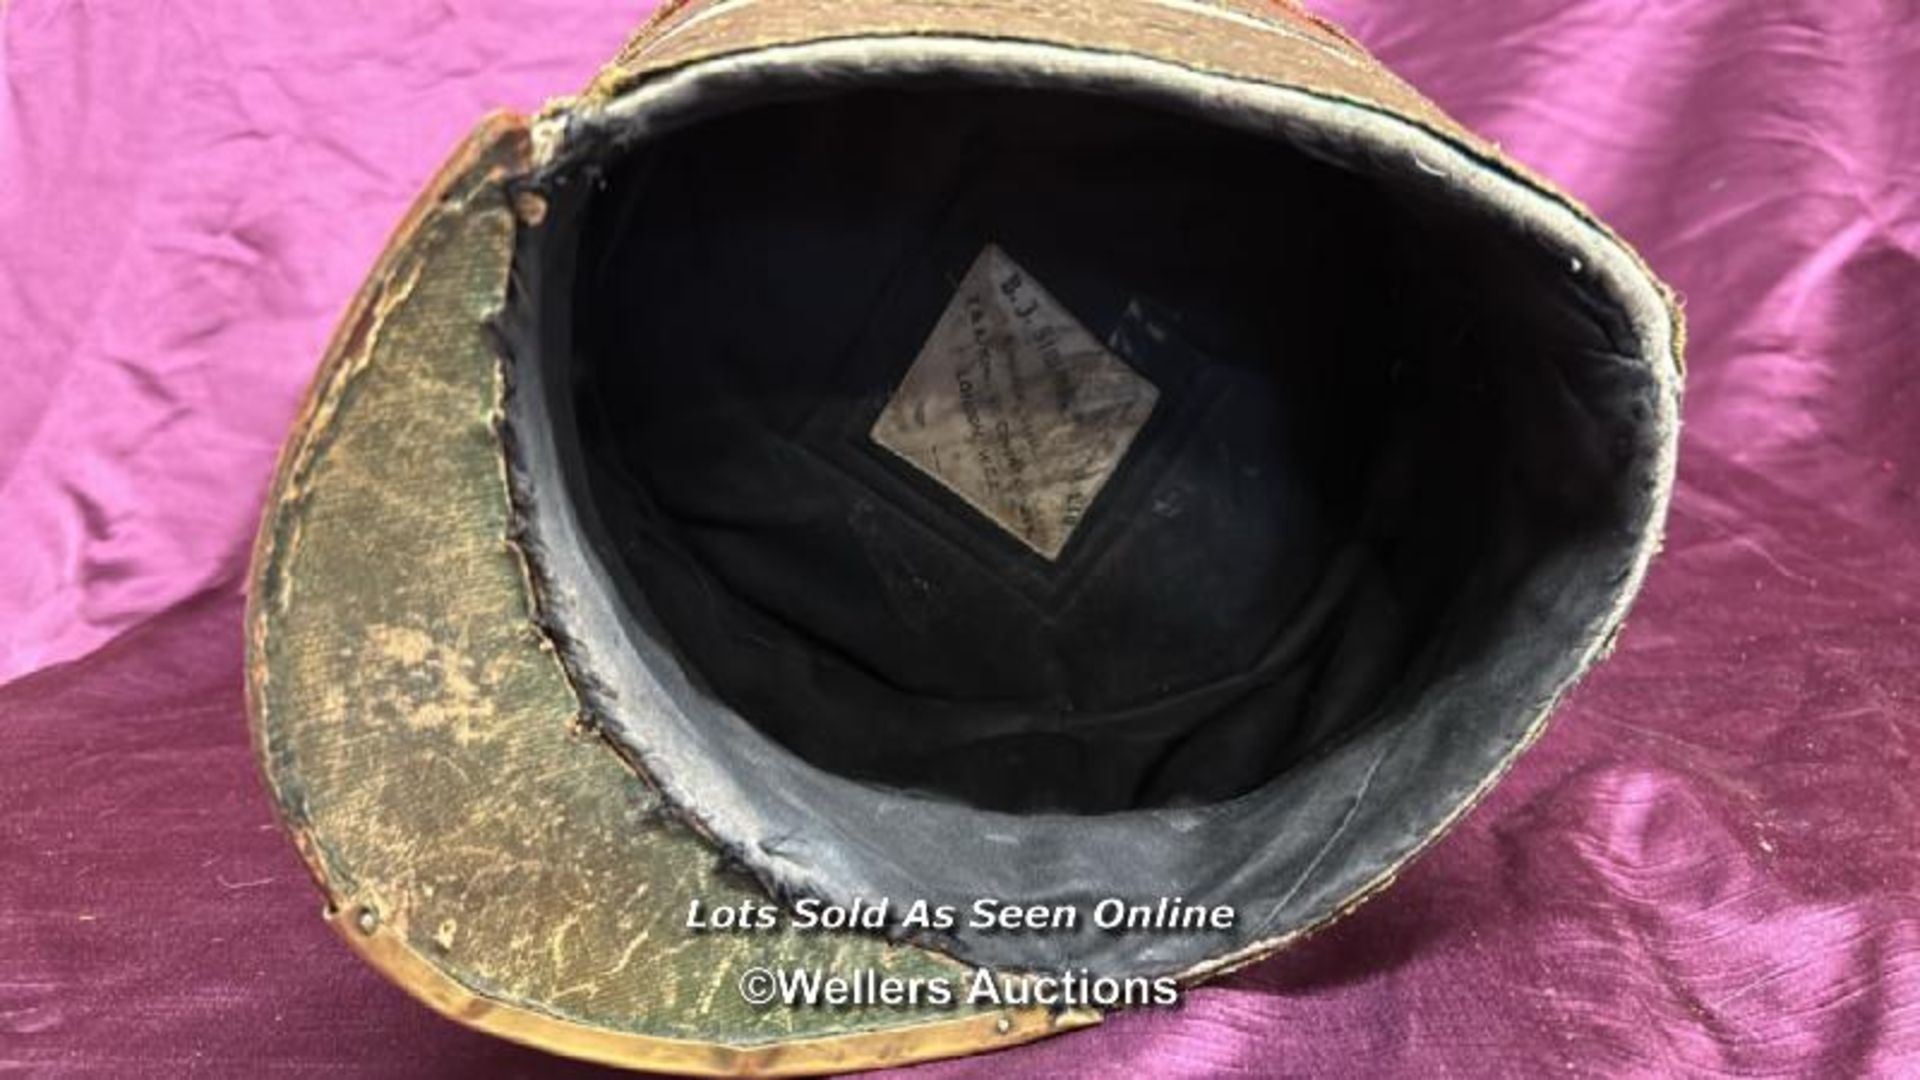 19TH CENTURY THEATRICAL SHAKO, MADE BY B J SIMMONS AND CO LTD - Image 4 of 5